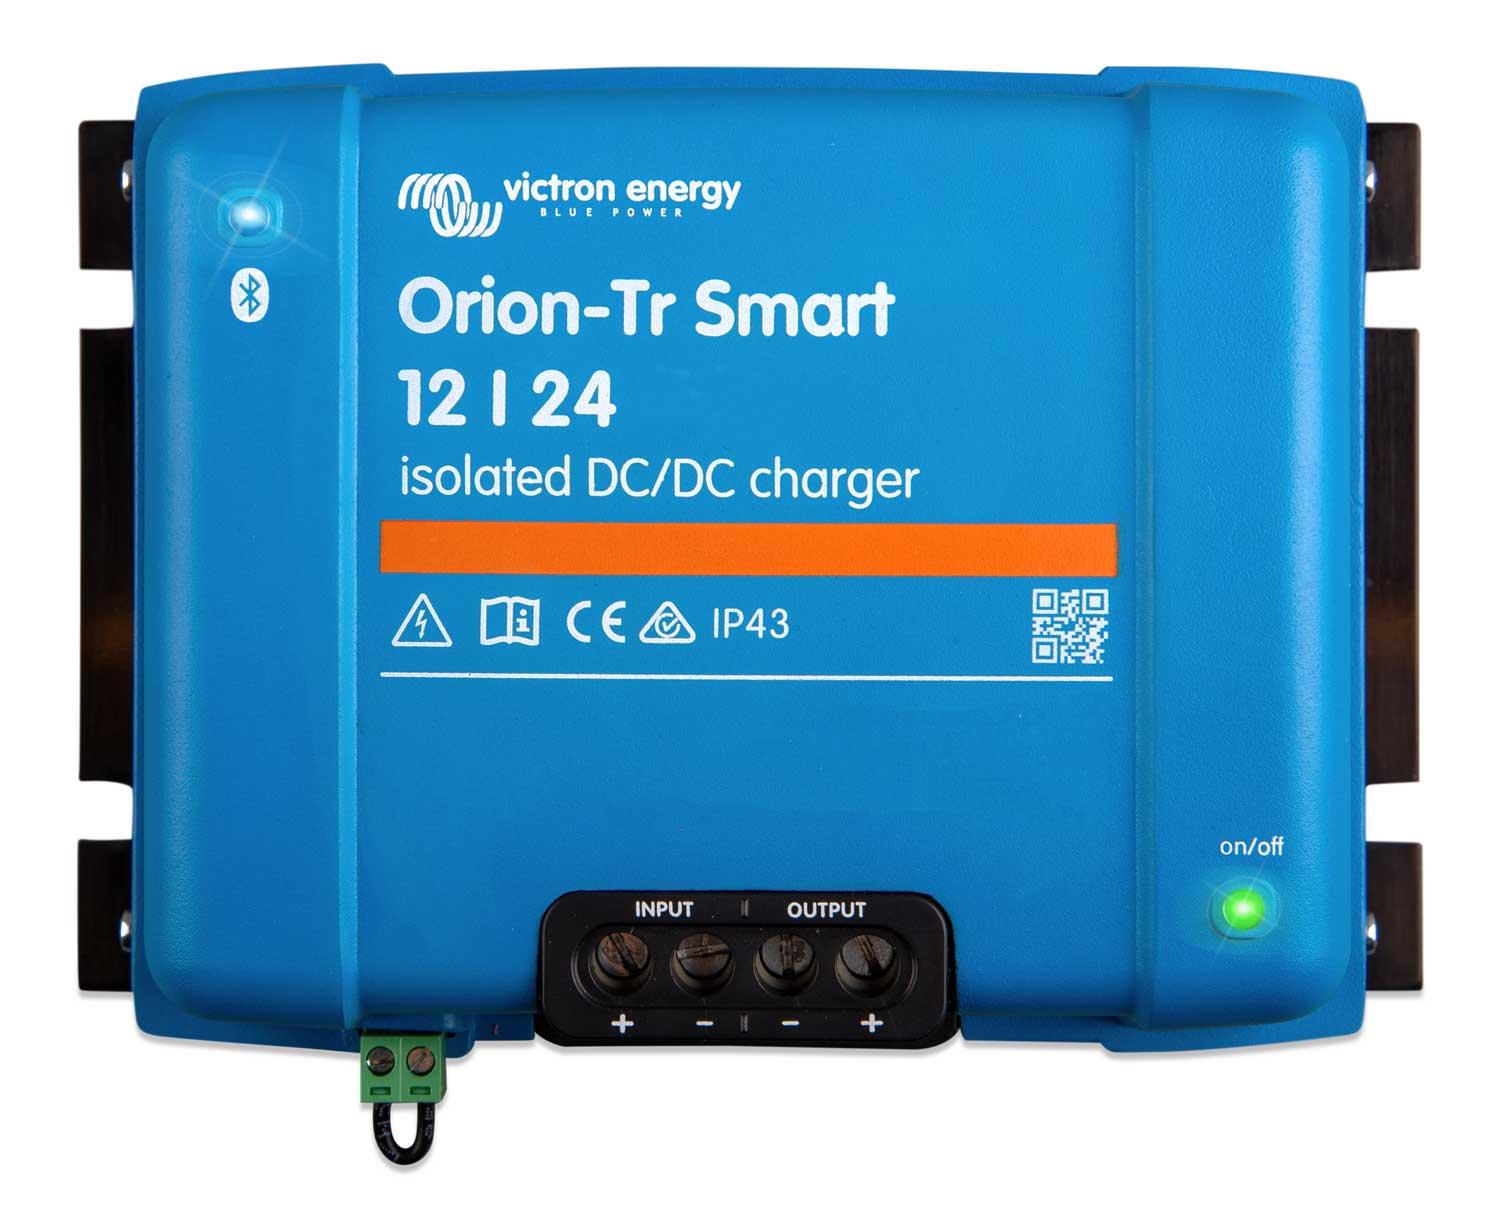 Victron Orion-Tr Smart DC-DC Ladebooster 12/24 10A 240W isoliert